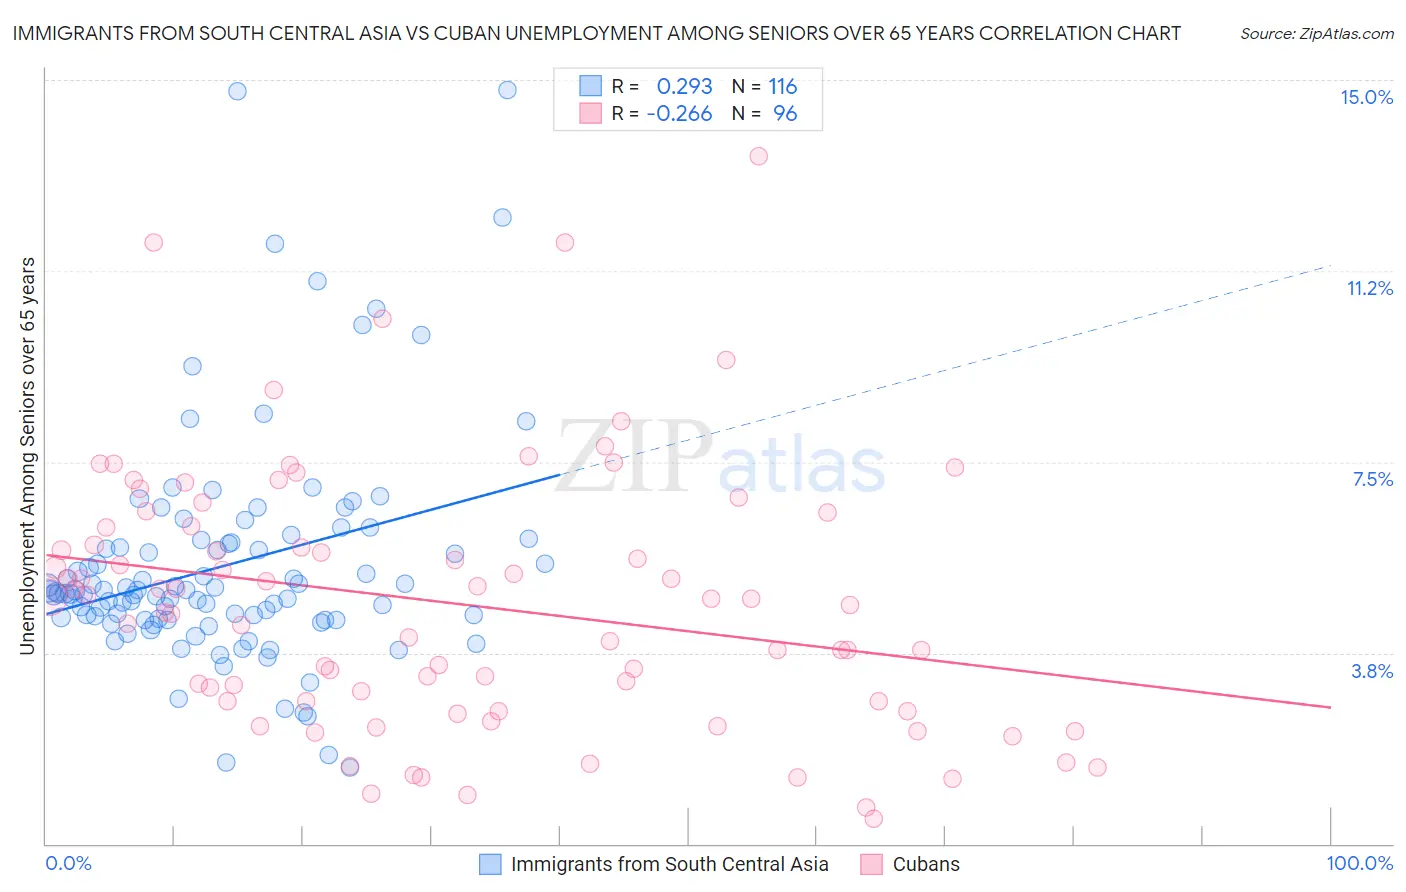 Immigrants from South Central Asia vs Cuban Unemployment Among Seniors over 65 years